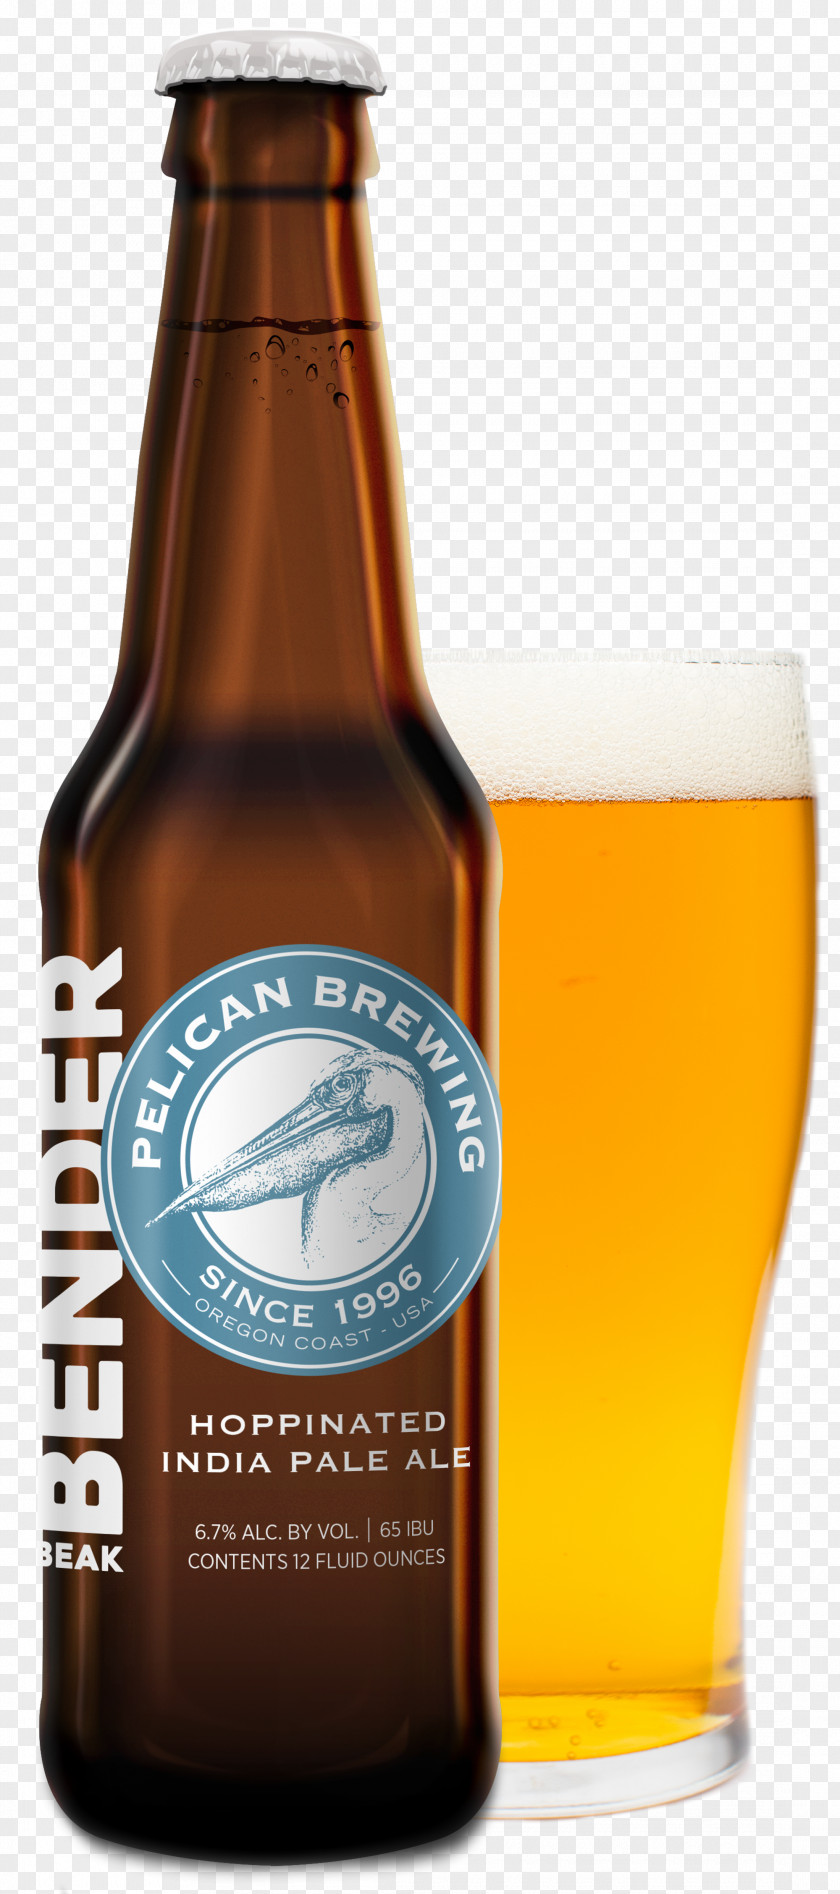 Beer Pelican Brewing India Pale Ale Founders Company PNG